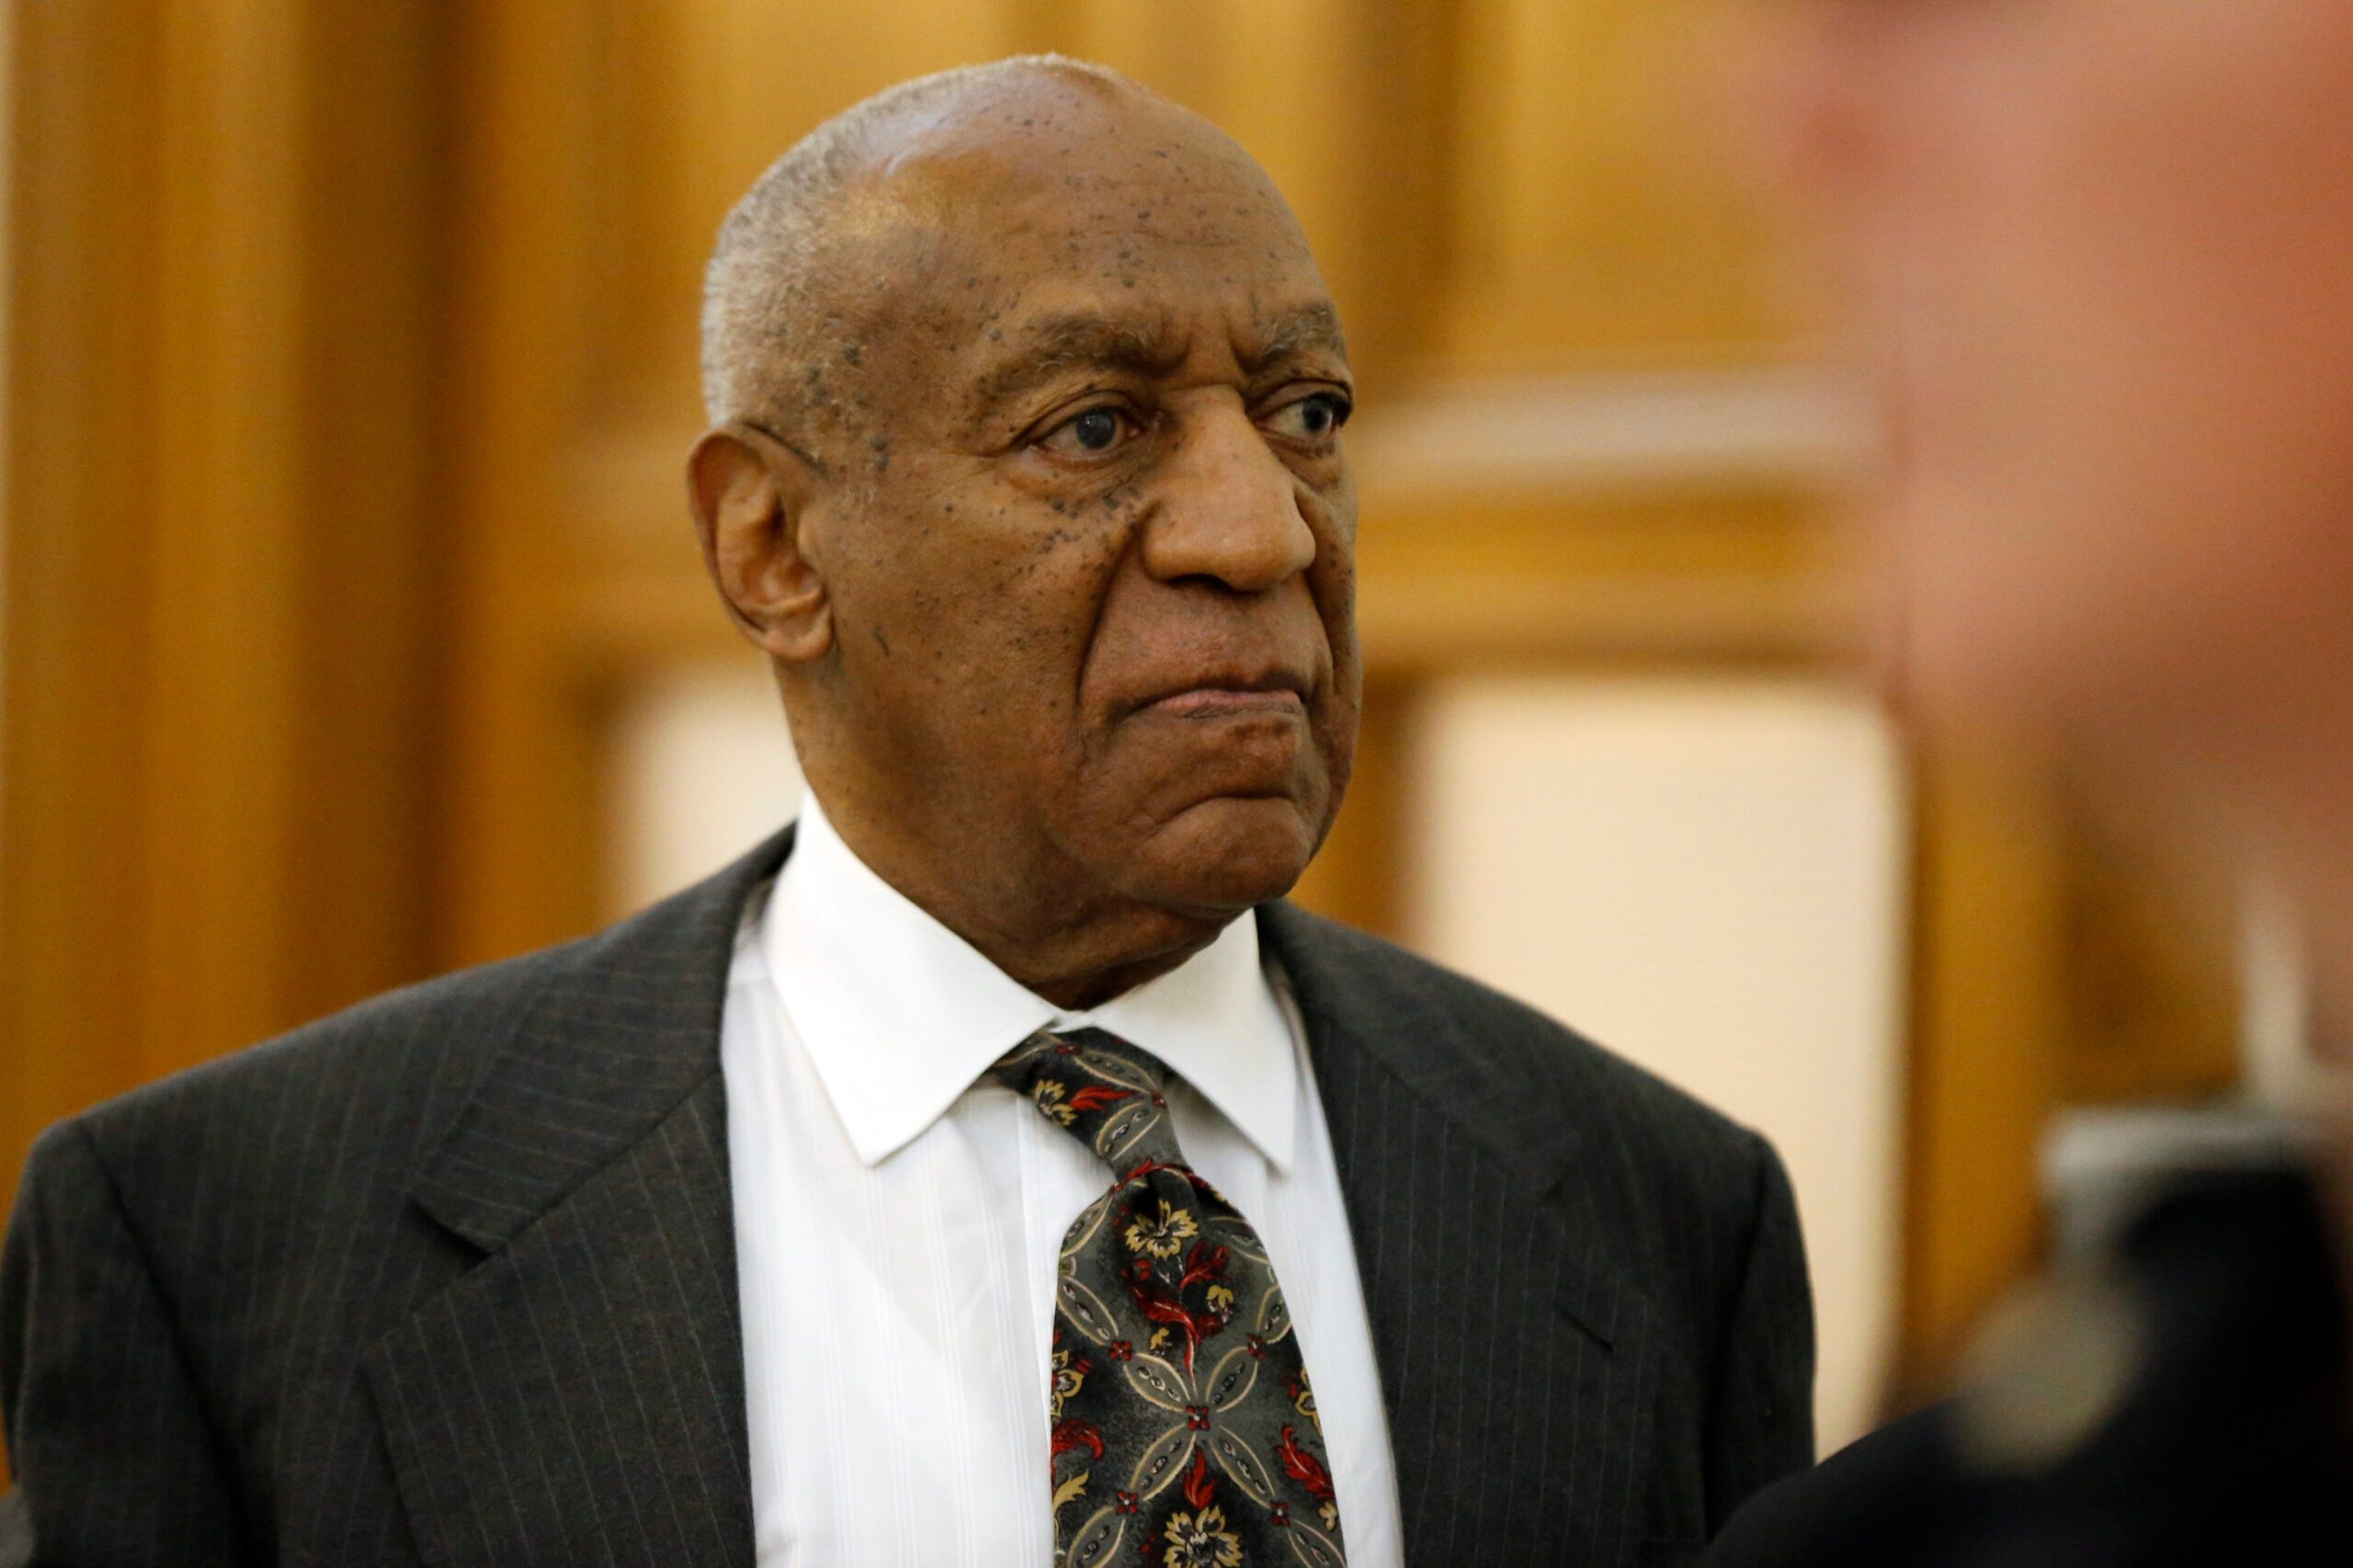 Bill Cosby loses appeal to have sex assault case dismissed